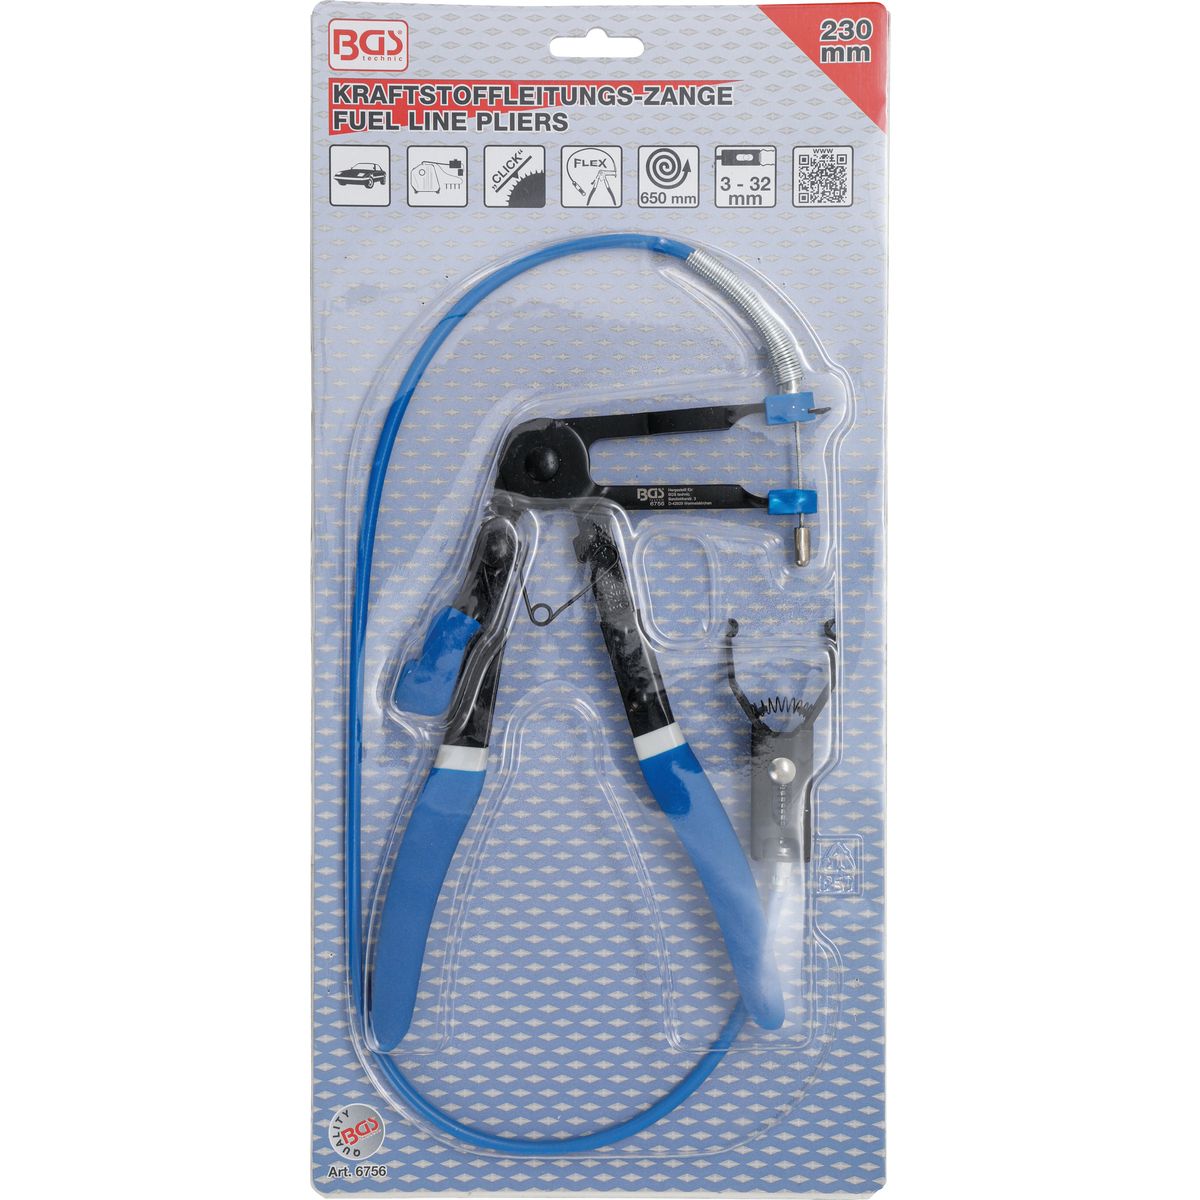 Fuel Line Pliers | with Bowden Cable | 650 mm